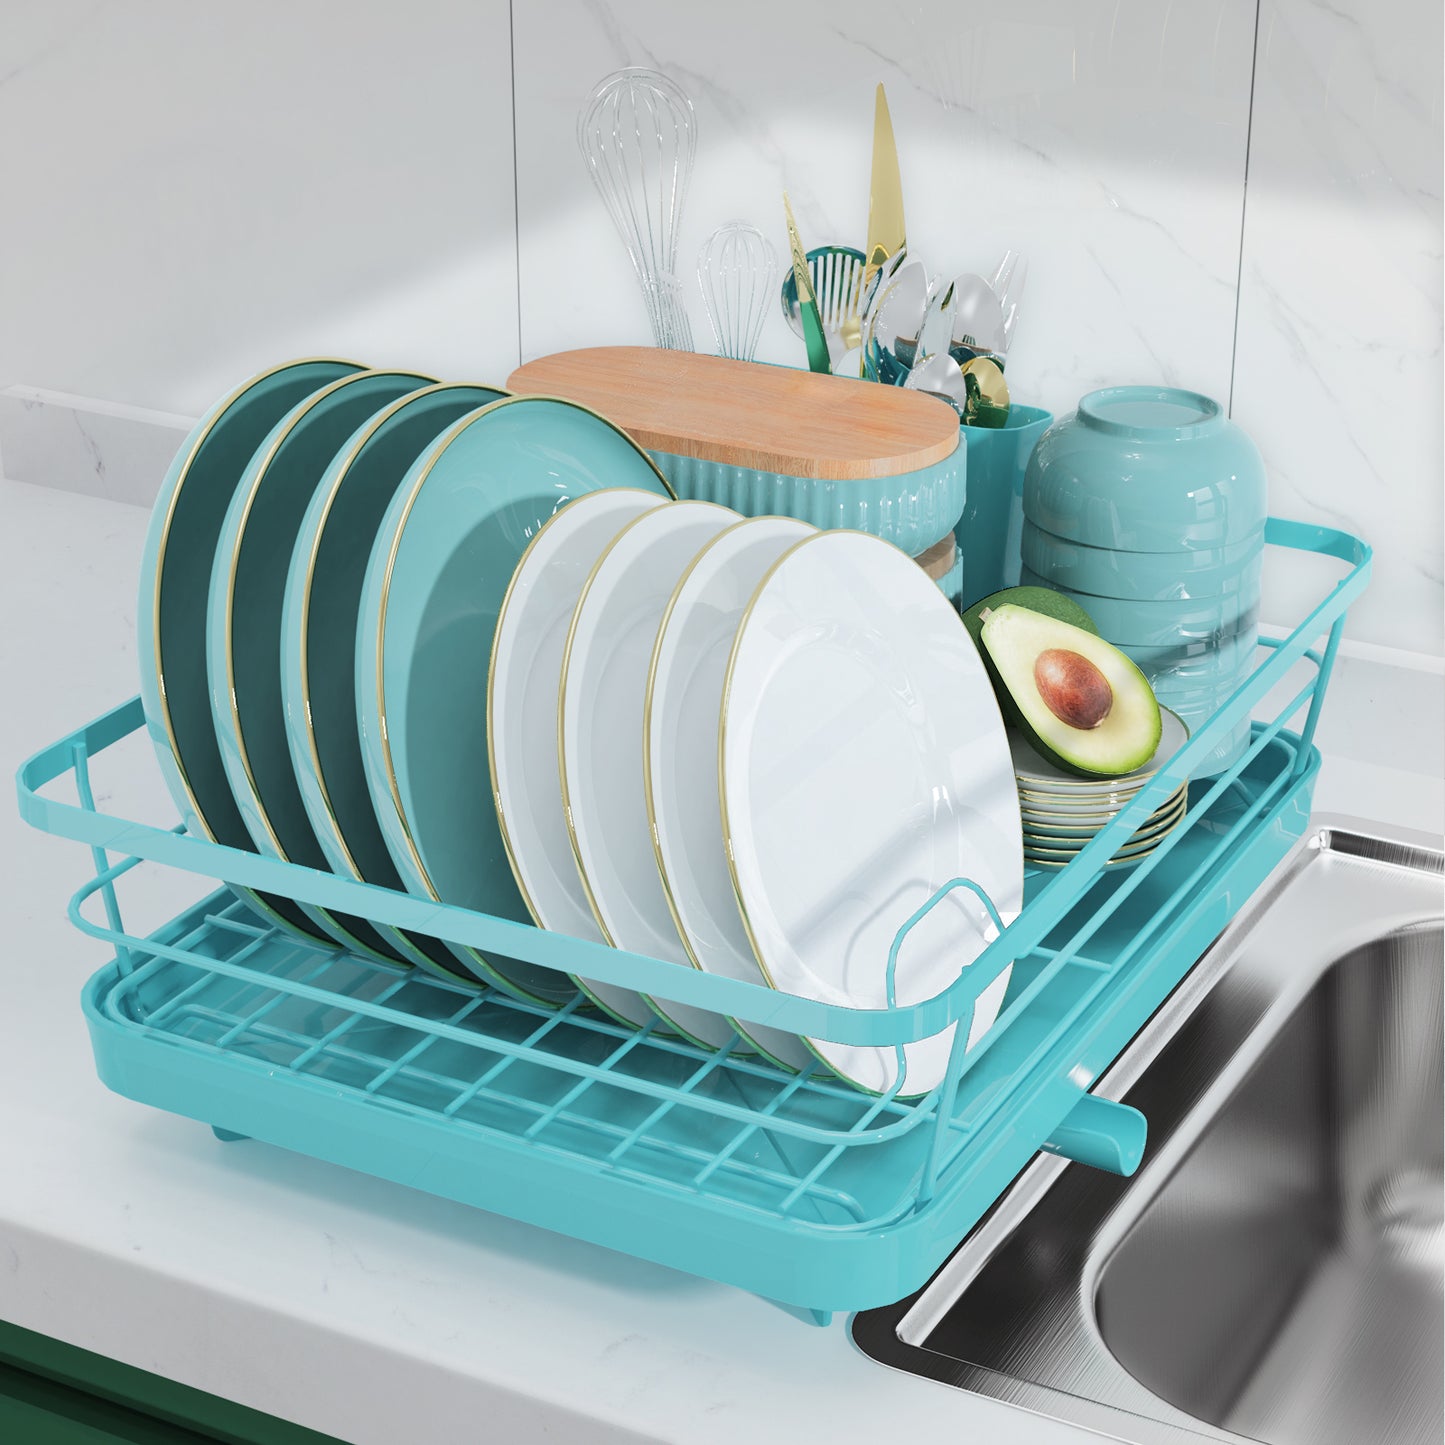  Sakugi Dish Drying Rack - Large Stainless Steel Dish Rack for  Kitchen Counter, Kitchen Organizers and Storage for Dishes, Bowls, Cutlery,  Gray